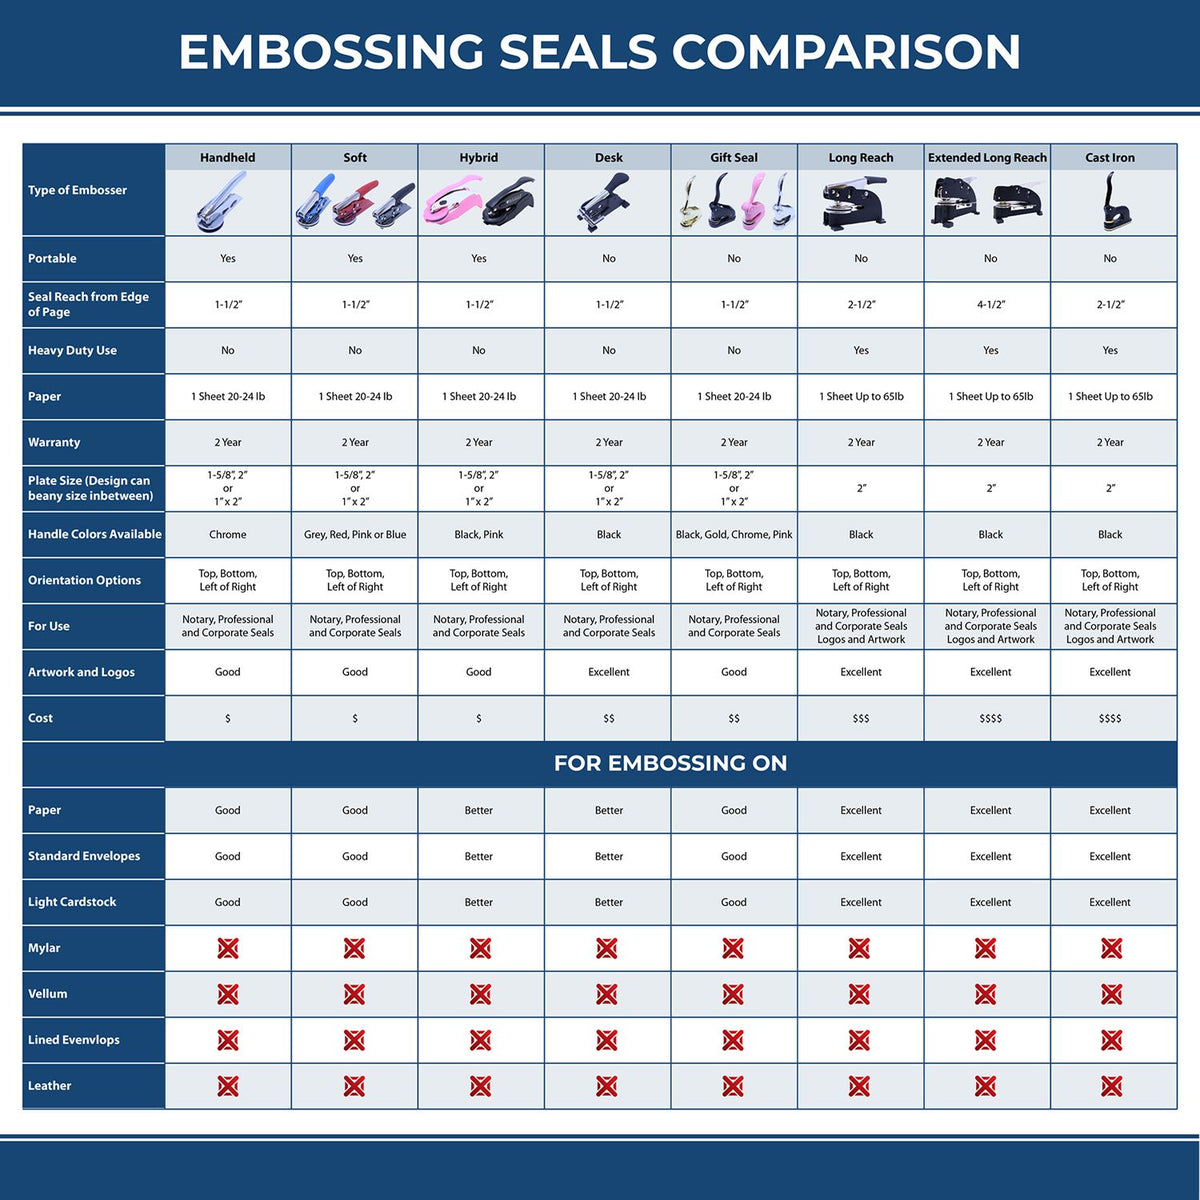 A comparison chart for the different types of mount models available for the Hybrid South Dakota Architect Seal